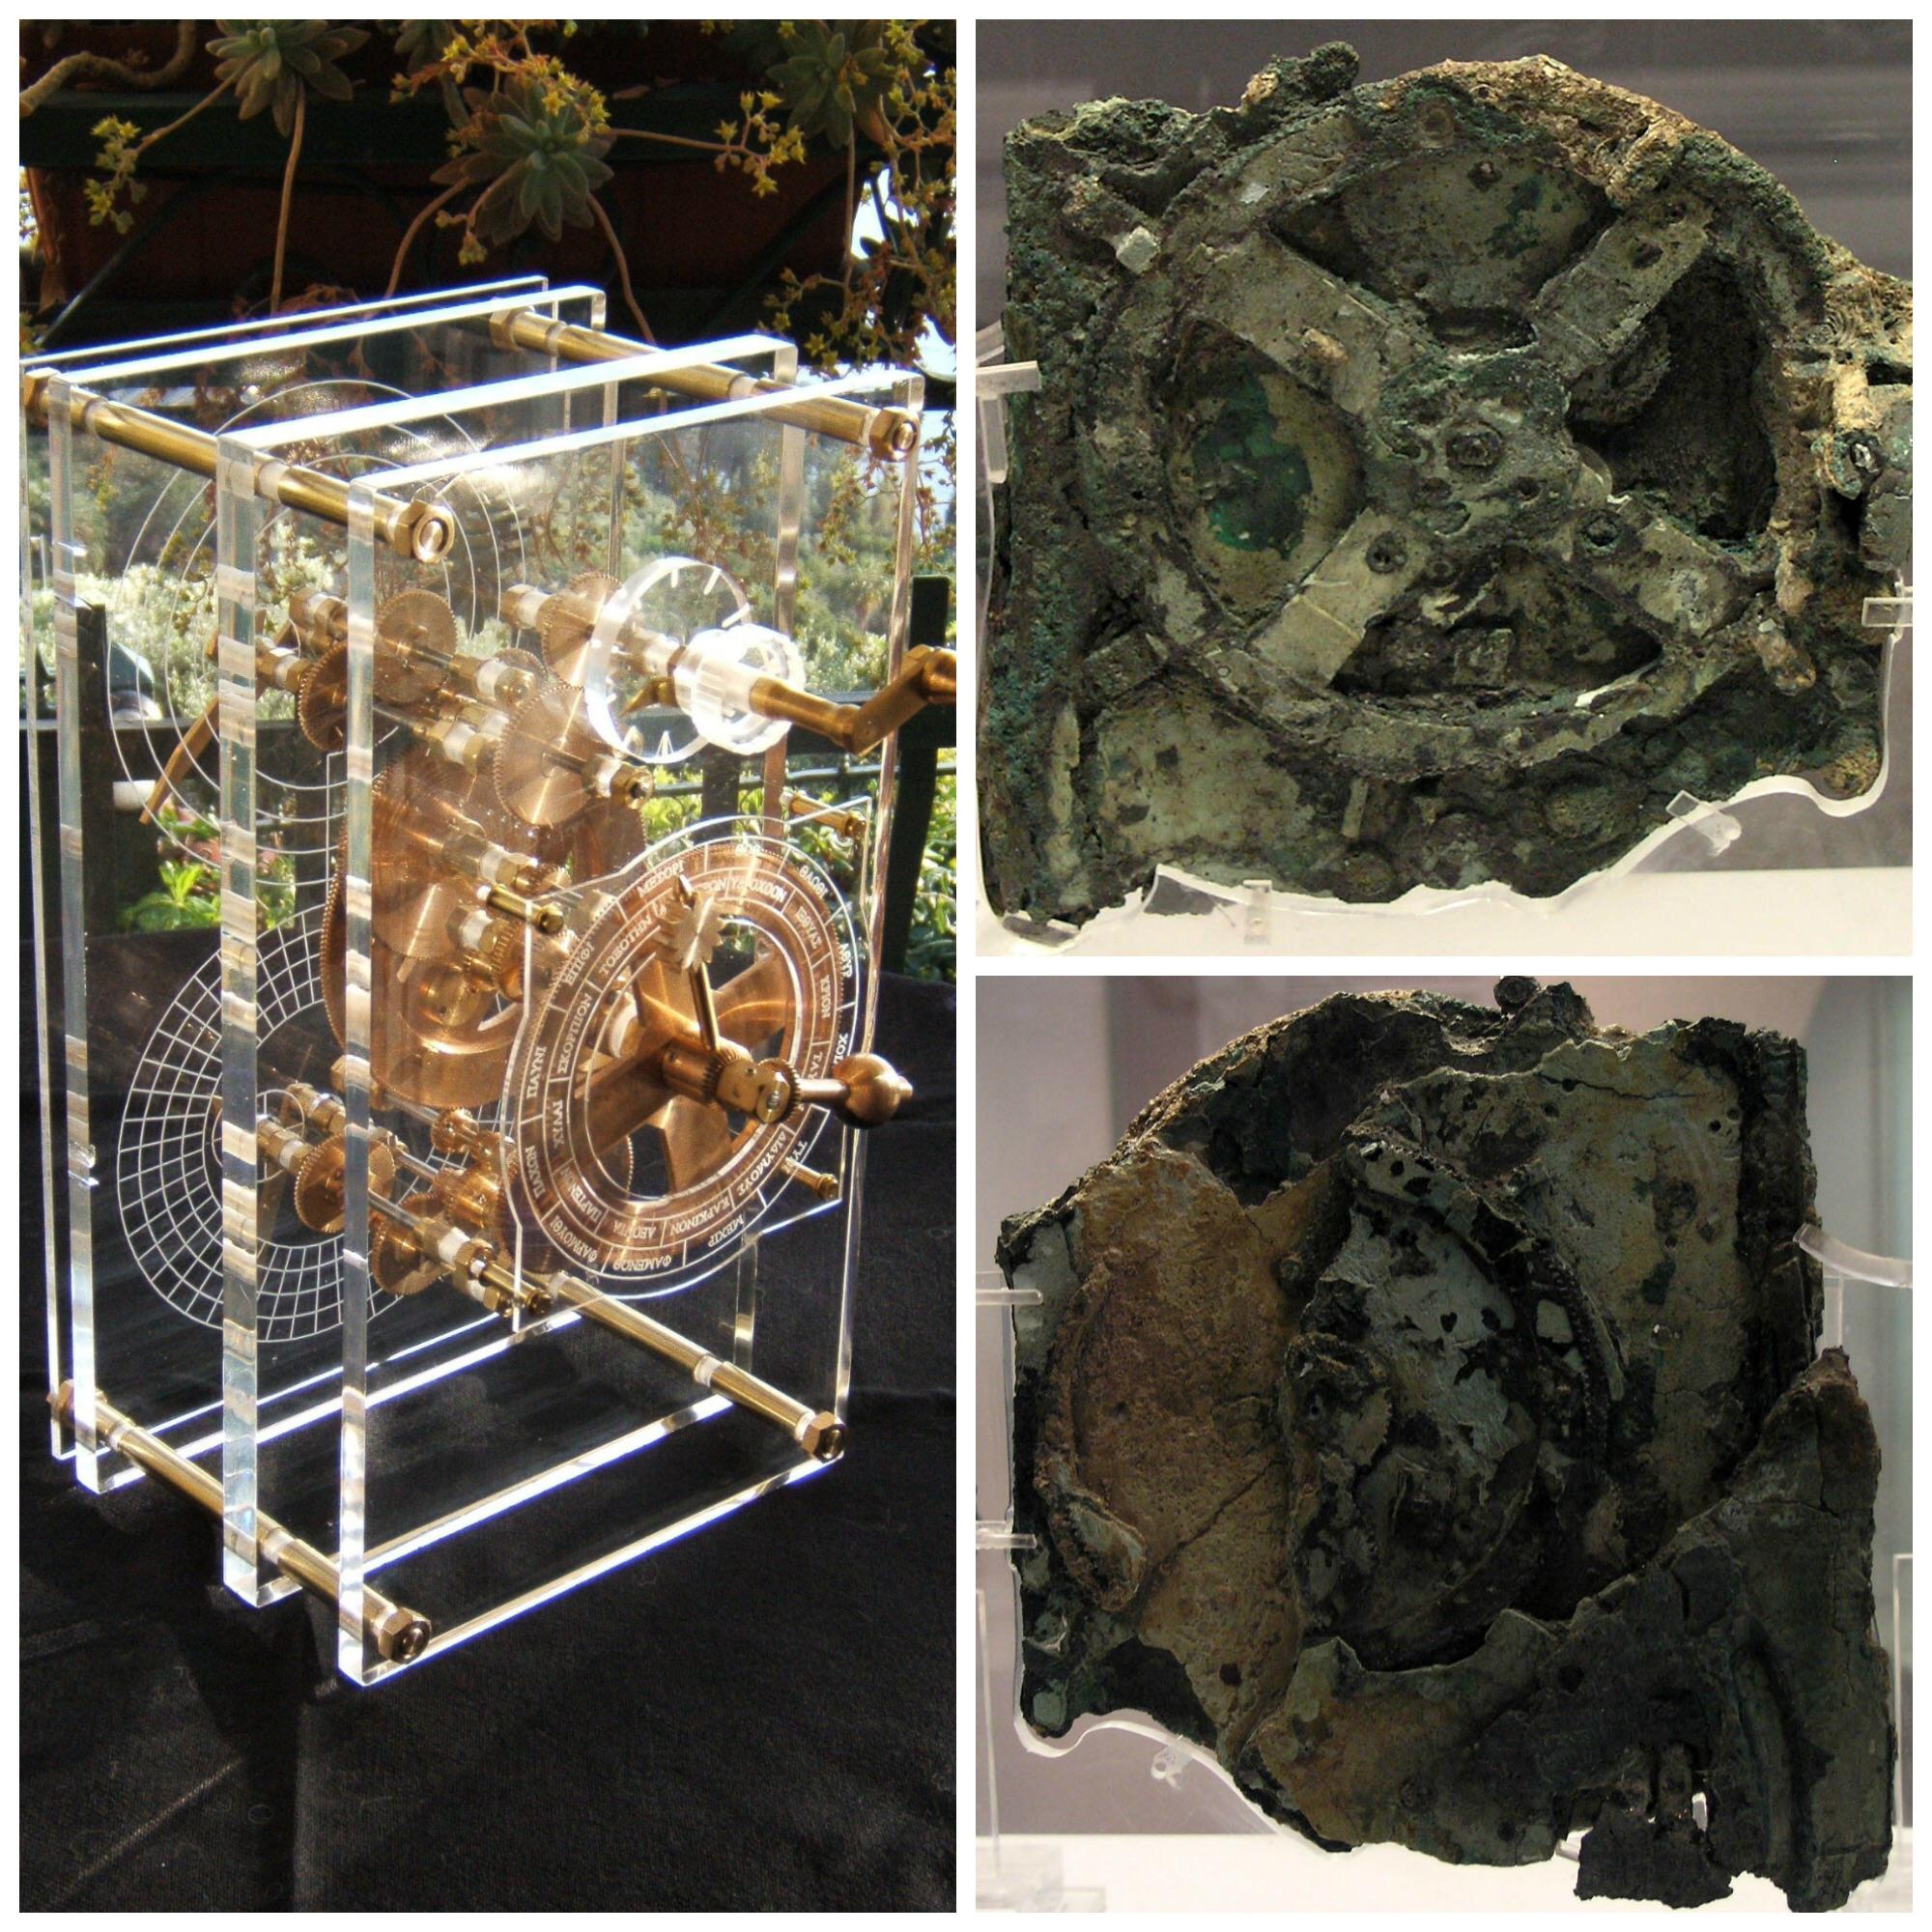 The Antikythera mechanism, maybe as old as 205 BCE, is the world’s oldest known computer.jpg